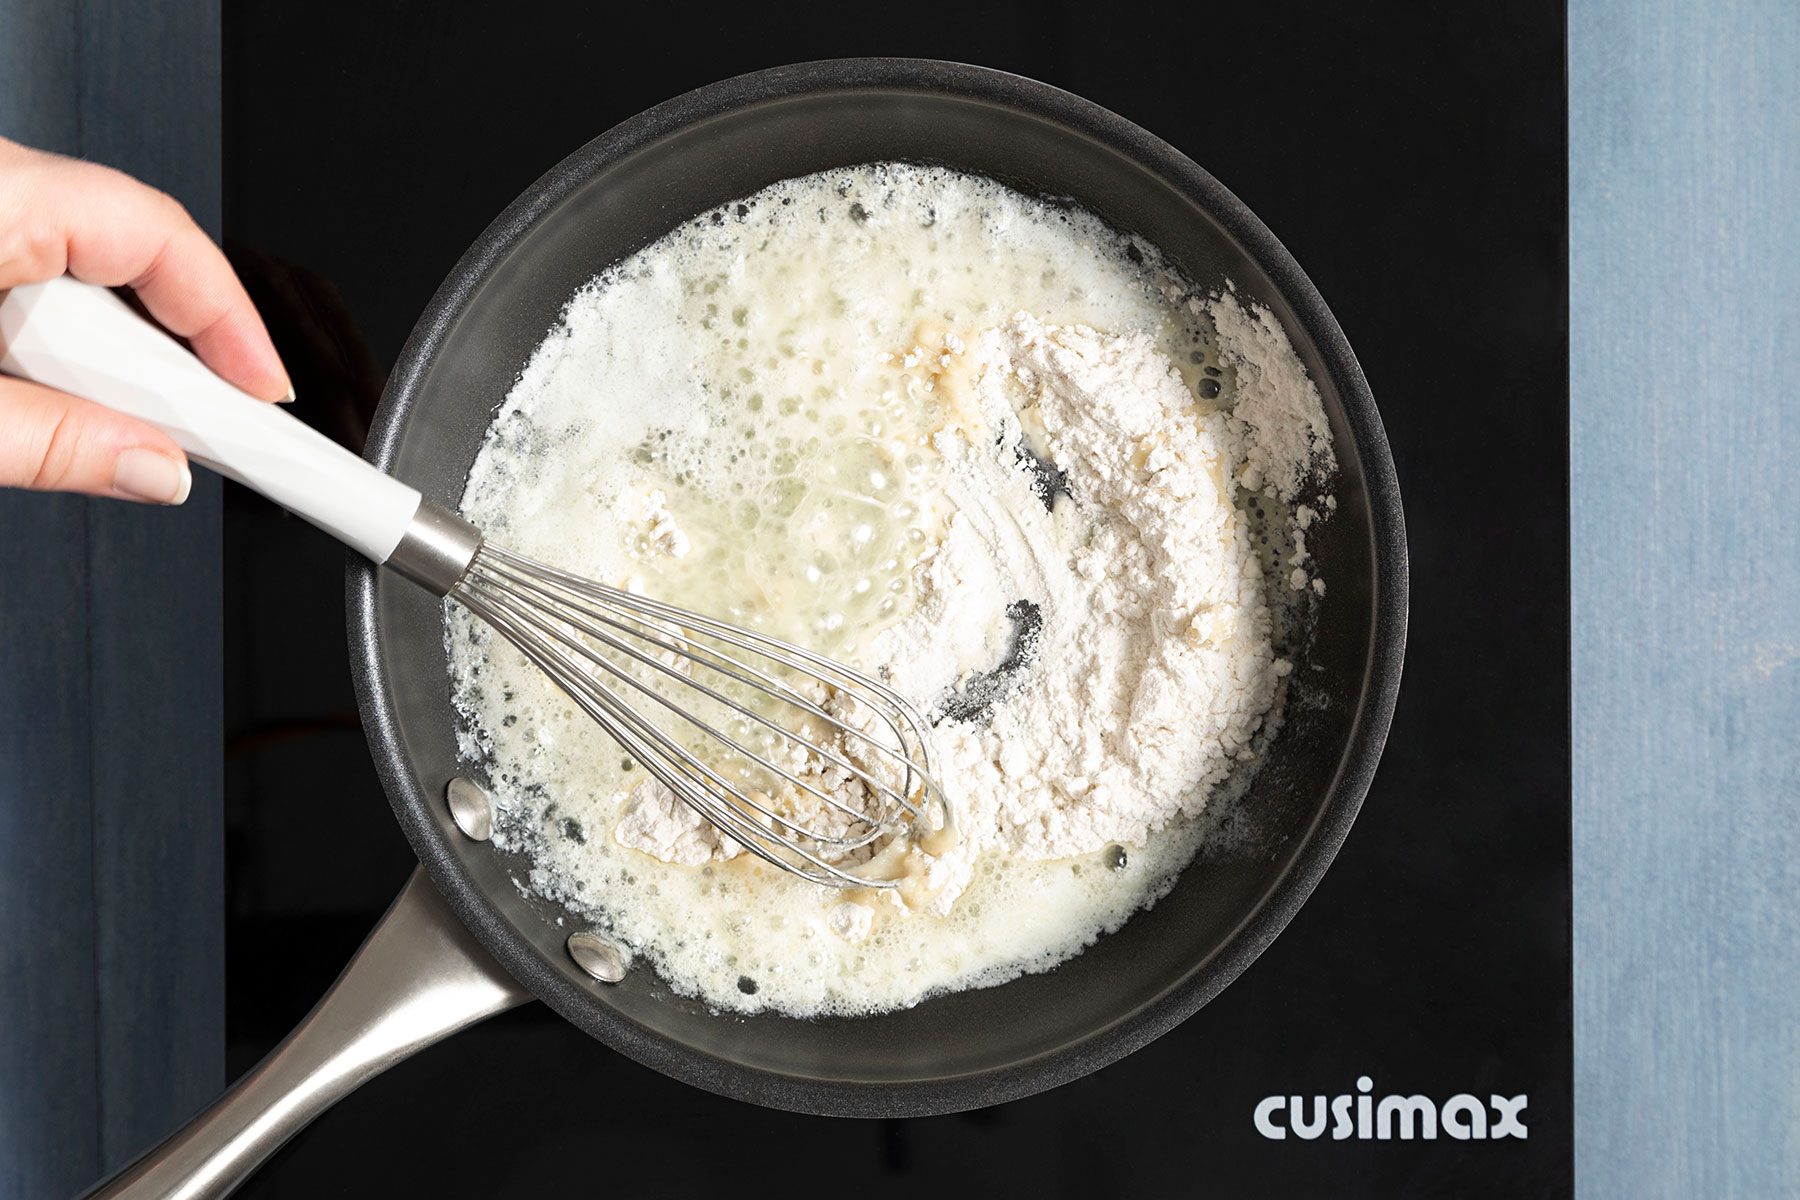 Mixing dry ingredients in skillet with butter